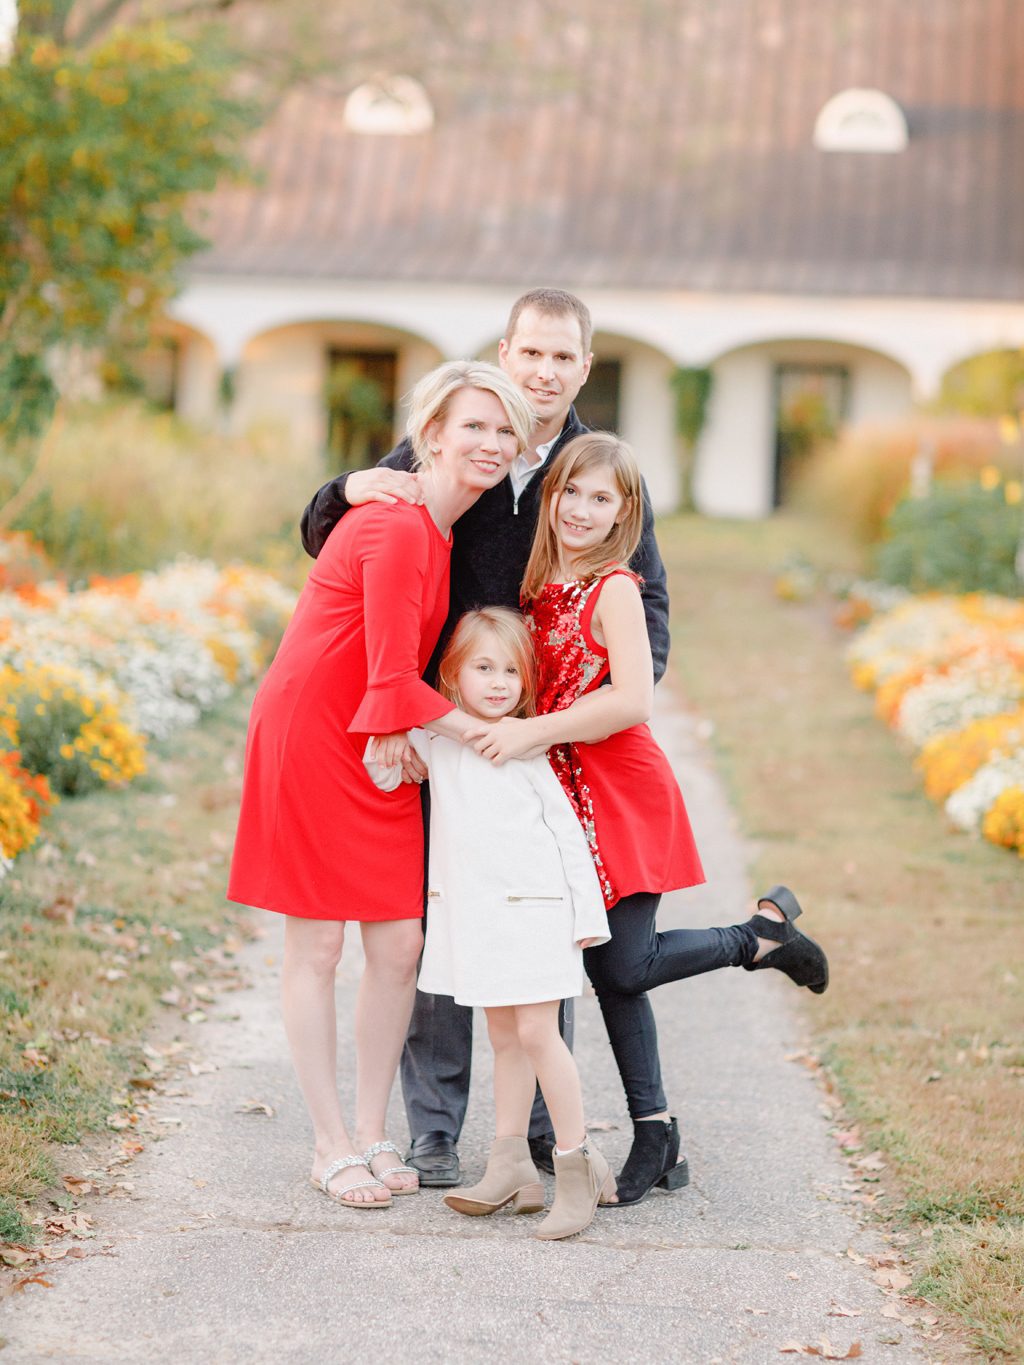 Photographing families in the Fall in St. Louis